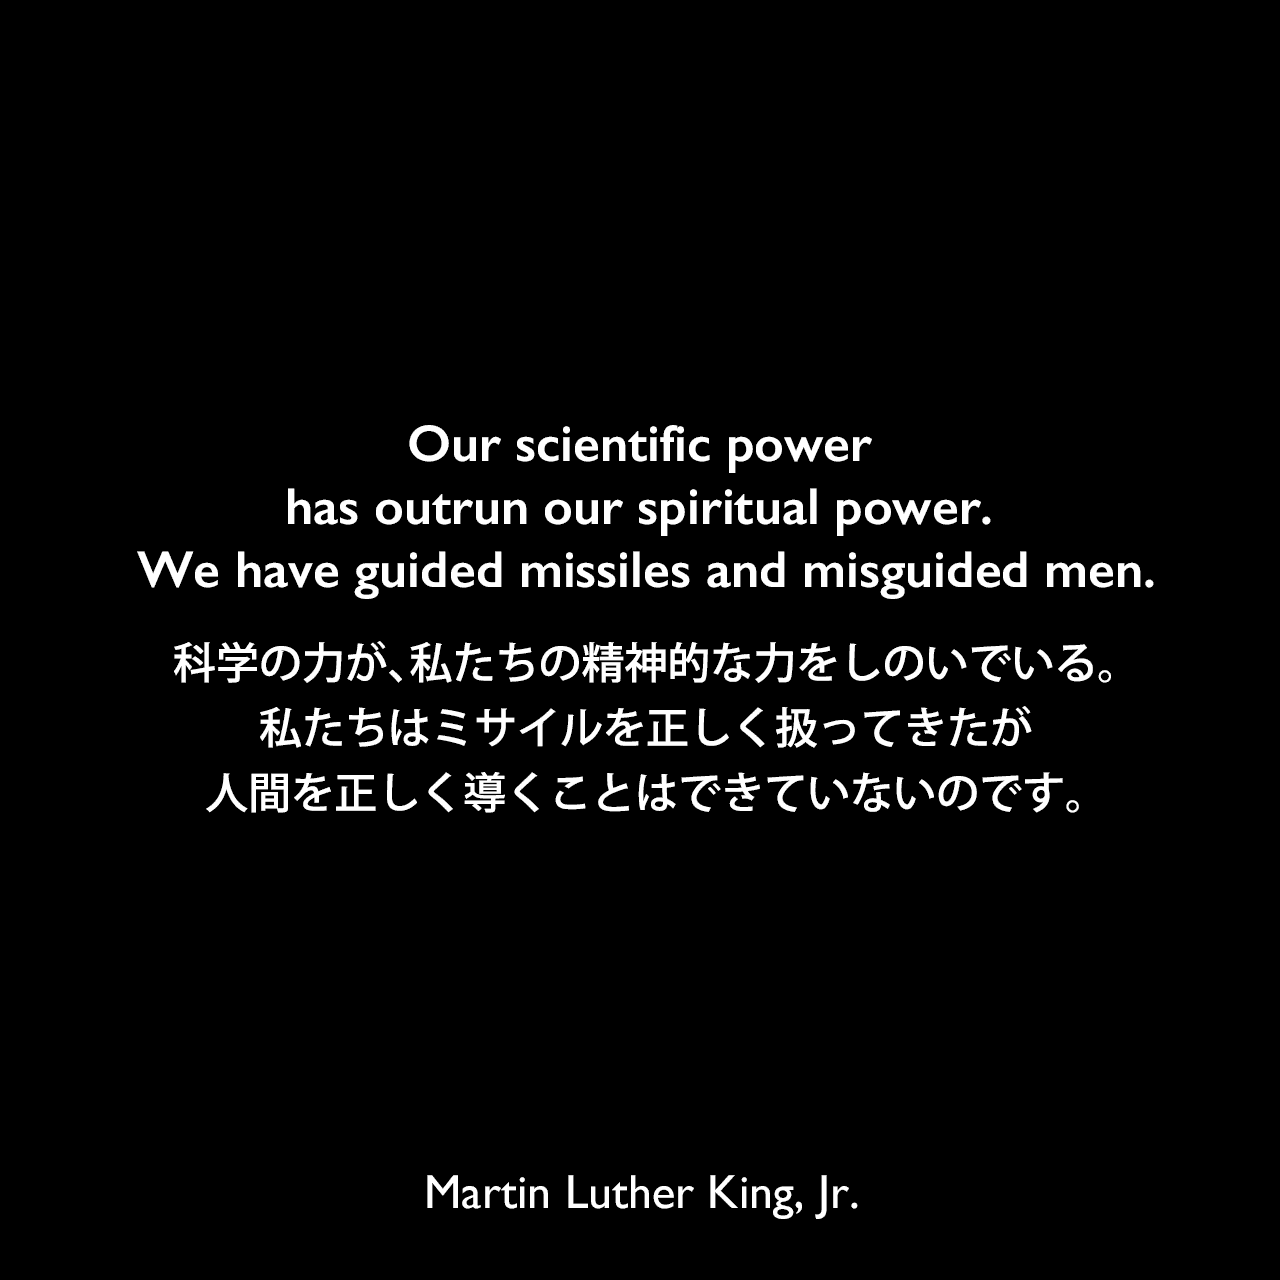 Our scientific power has outrun our spiritual power. We have guided missiles and misguided men.科学の力が、私たちの精神的な力をしのいでいる。私たちはミサイルを正しく扱ってきたが、人間を正しく導くことはできていないのです。- 1965年の説教「Keep Moving From This Mountain」よりMartin Luther King, Jr.